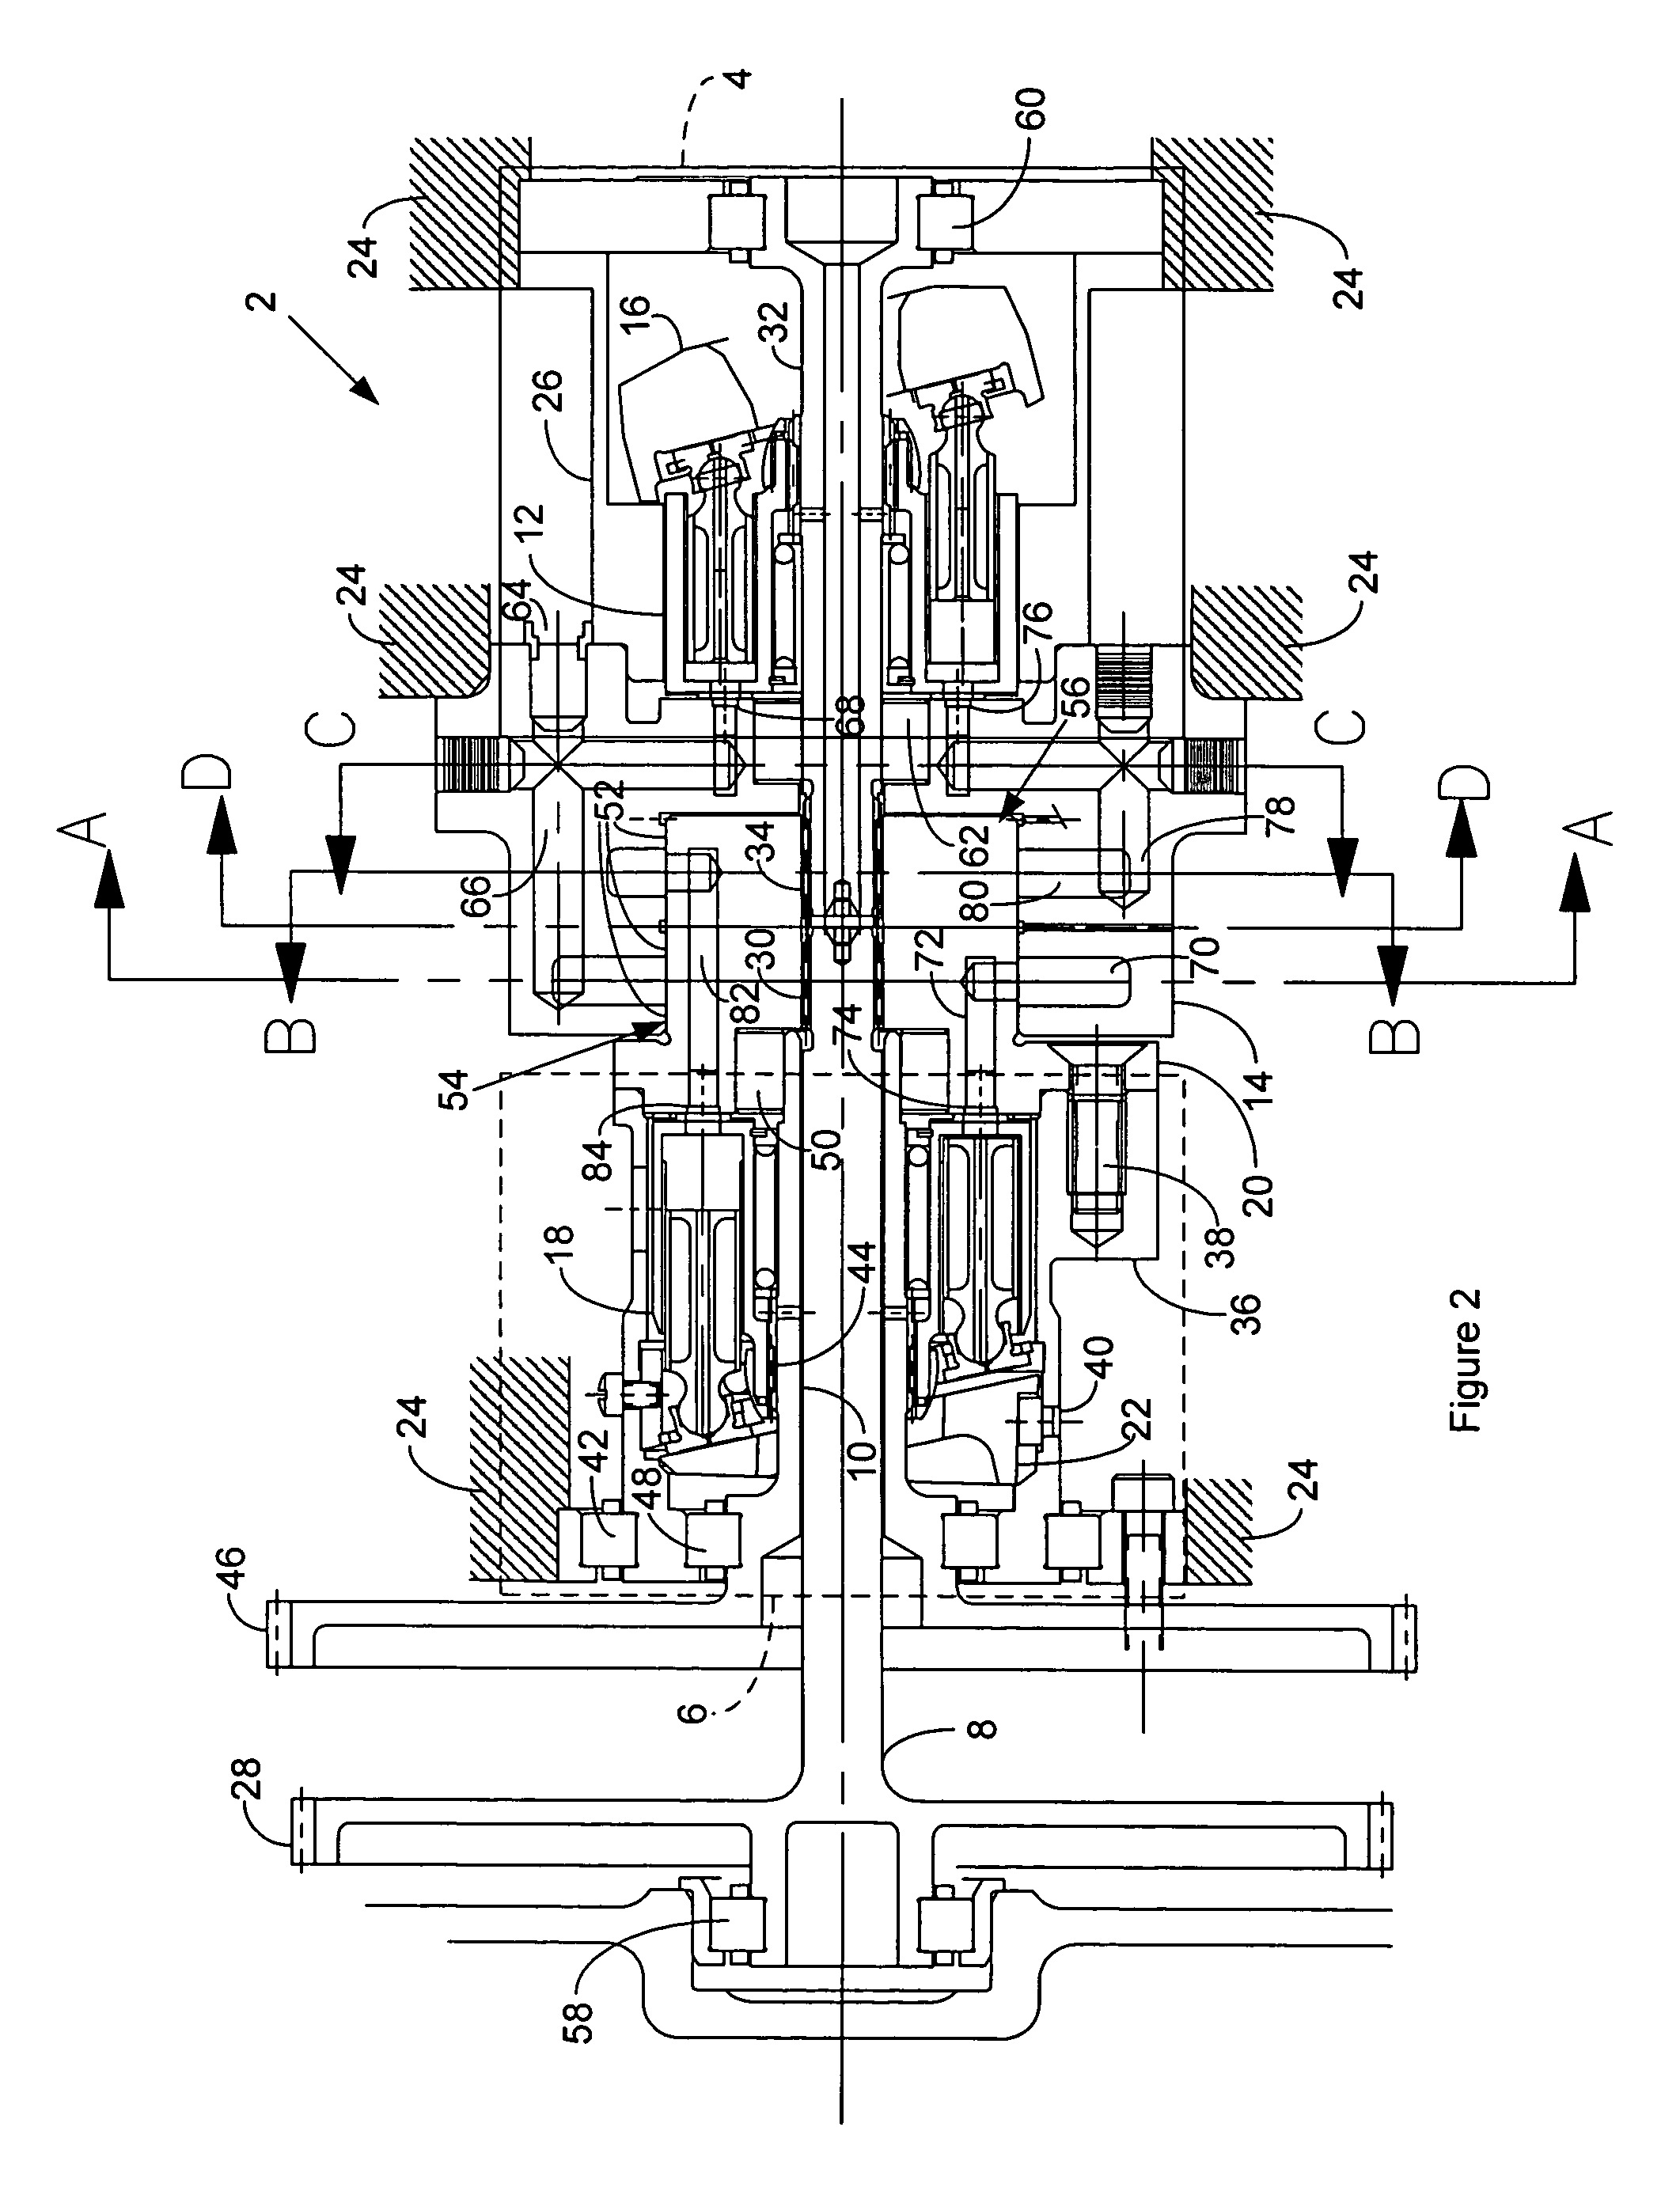 Hydraulic differential for integrated drive generator